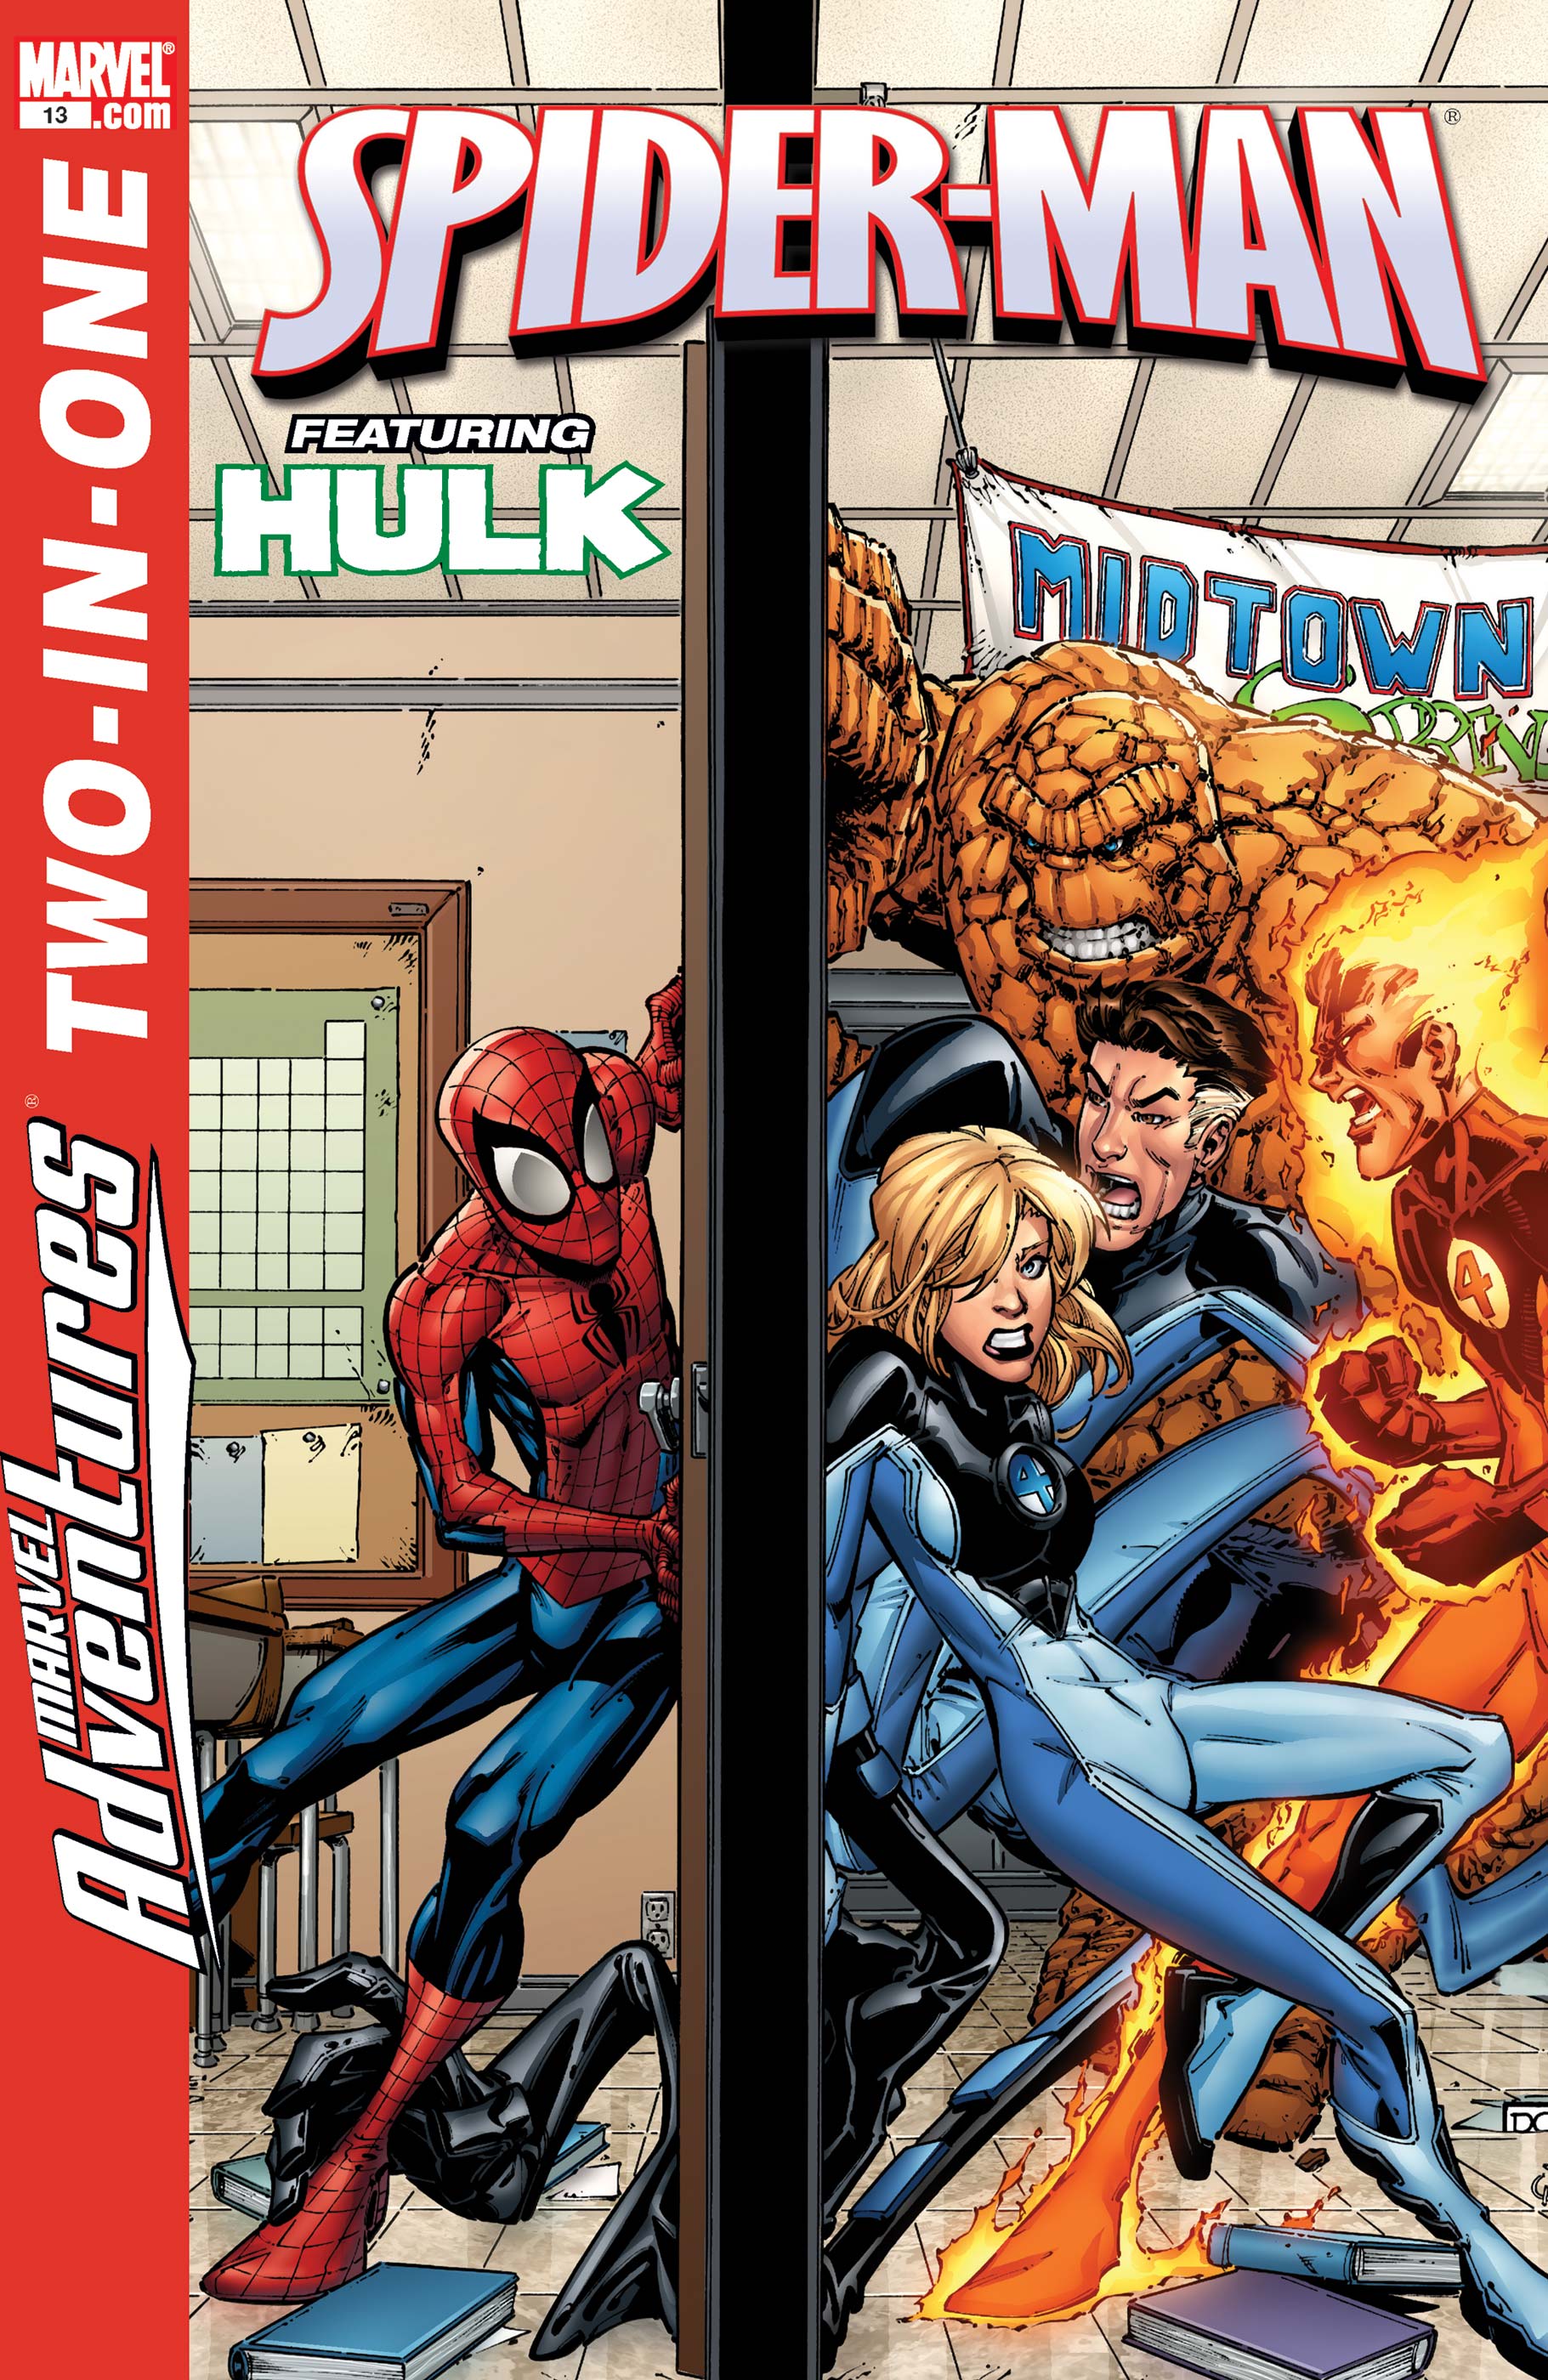 Marvel Adventures Two-in-One (2007) #13